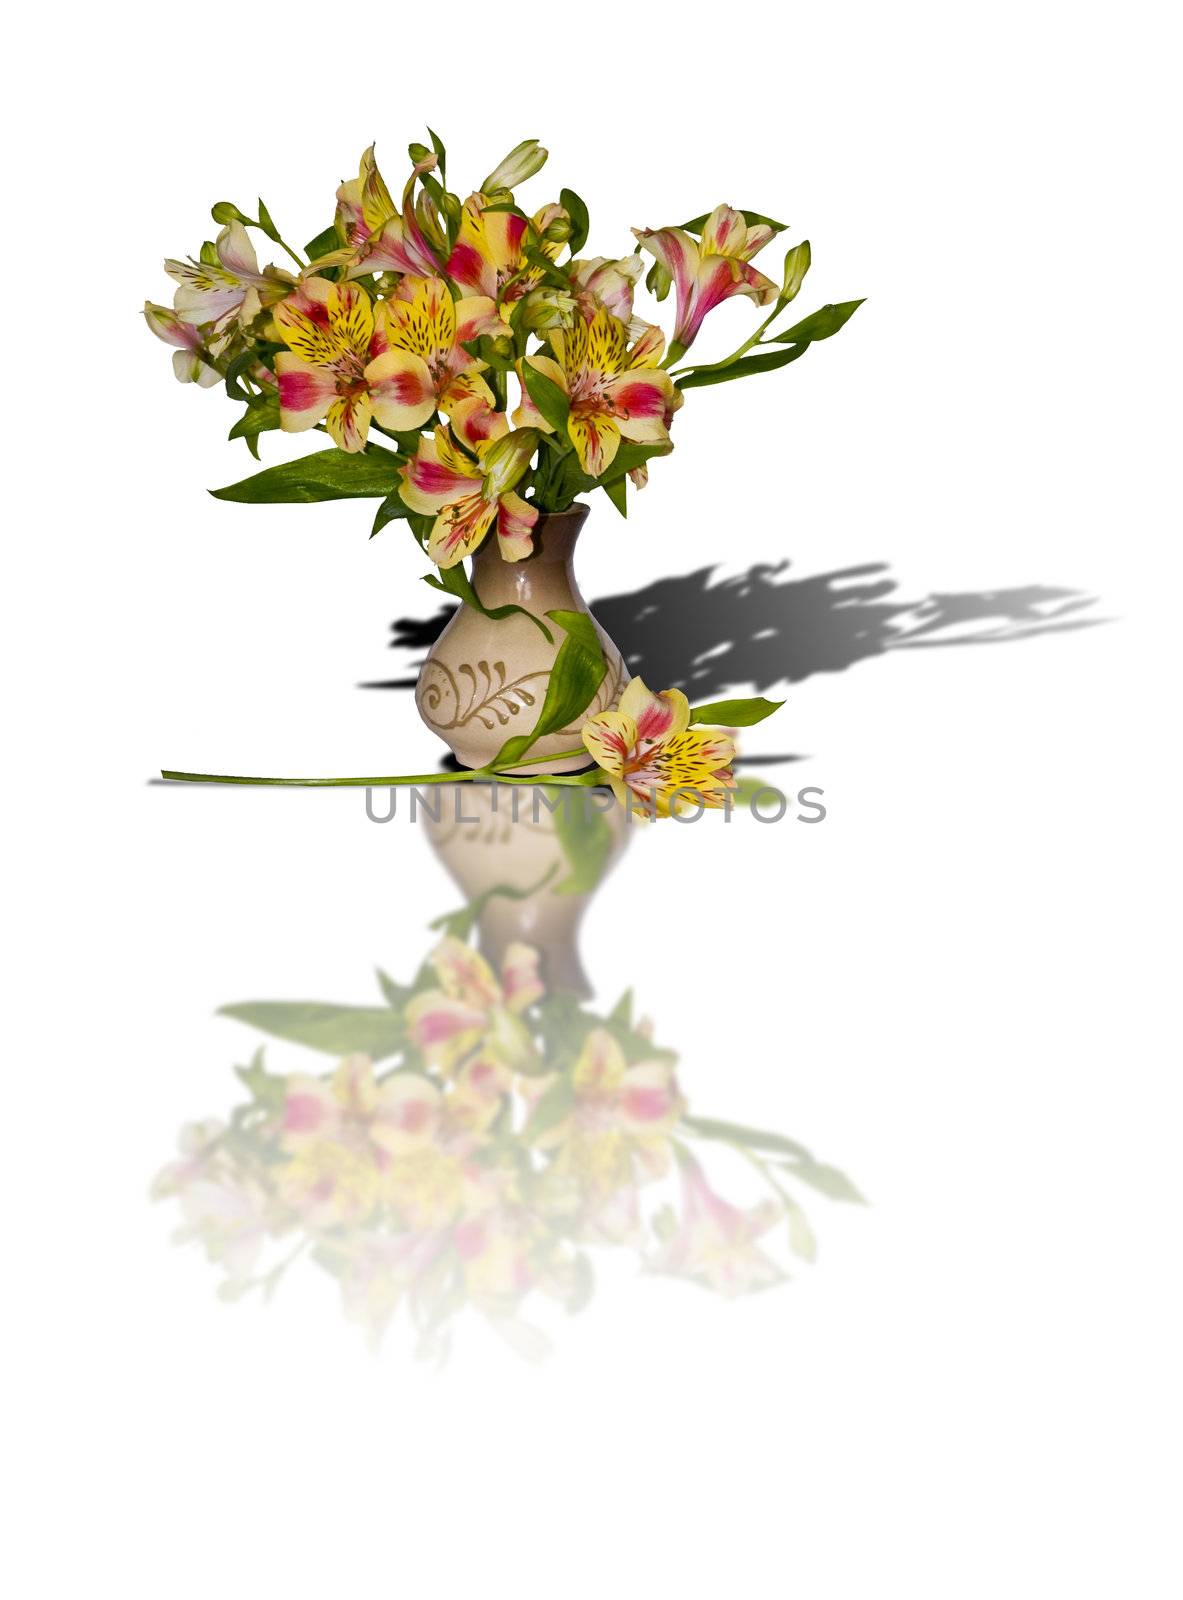 The image of a bouquet of alstroemeria in a vase and its shadow